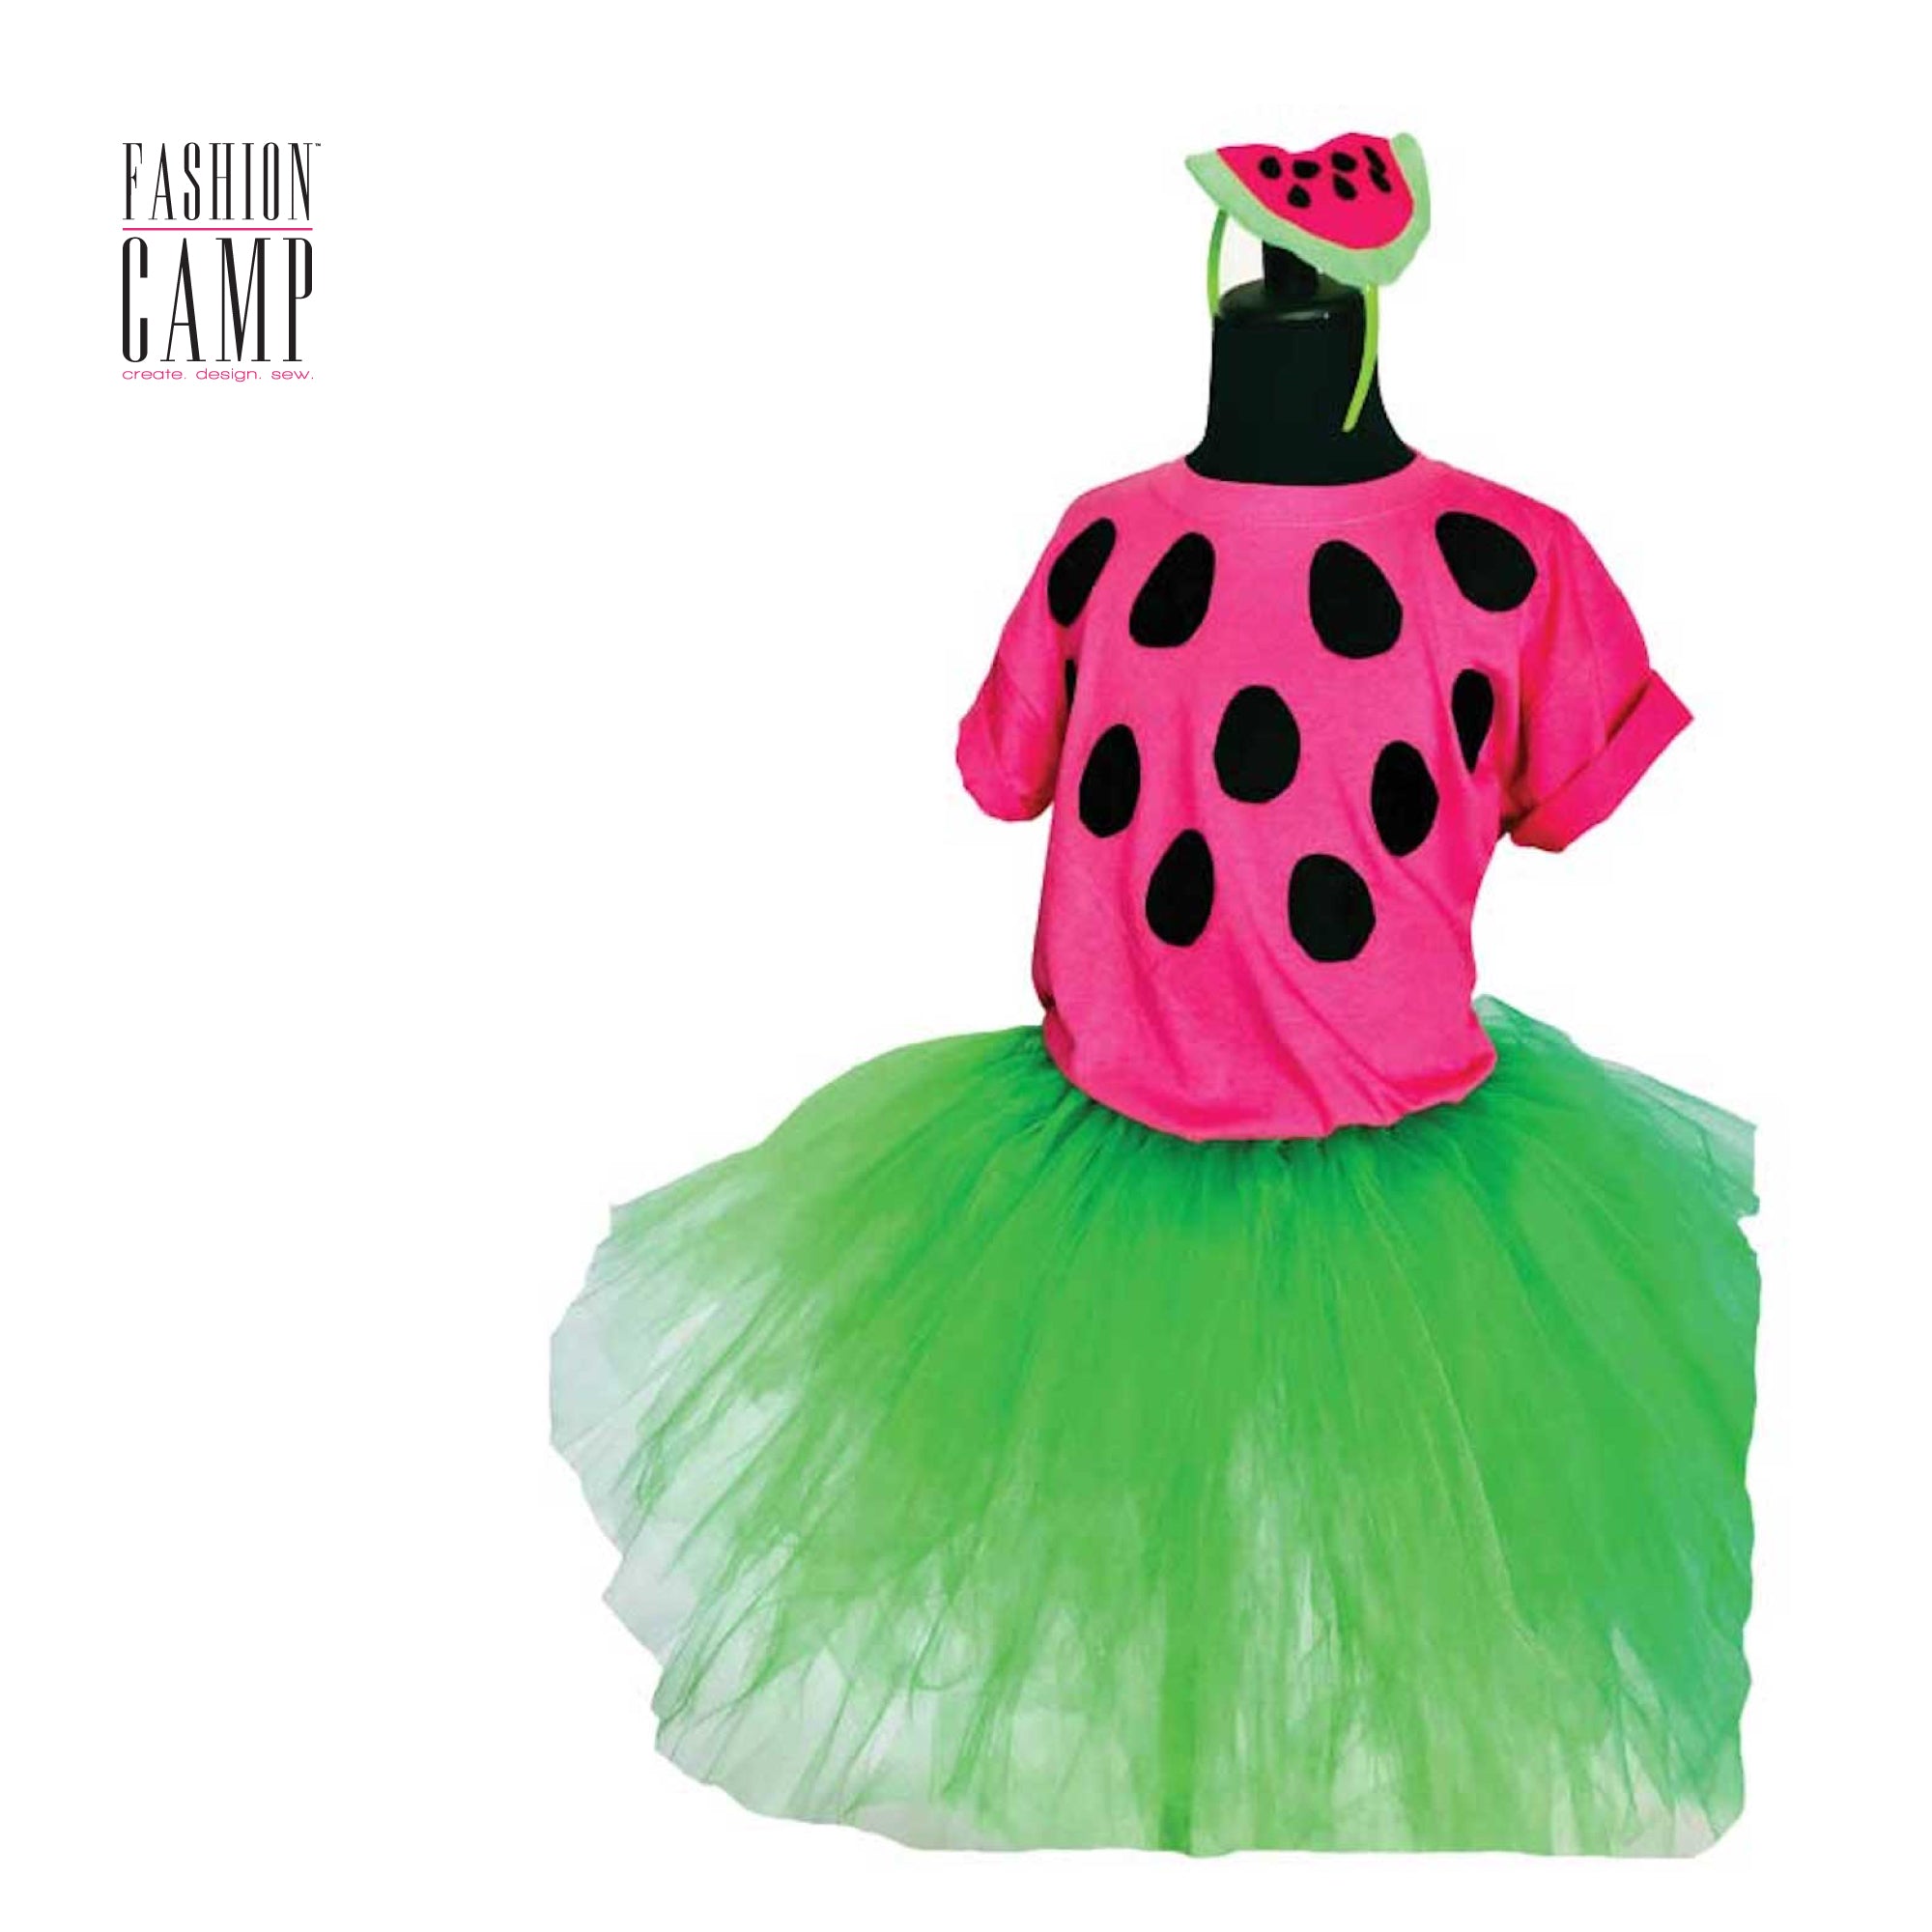 High Quality Watermelon Globe Mascot Costume For Halloween, Christmas, And  Carnival Cute Cartoon Fruit Plush Anime Theme Character Adult Size Fancy  Dress From Topsponsors, $163.56 | DHgate.Com